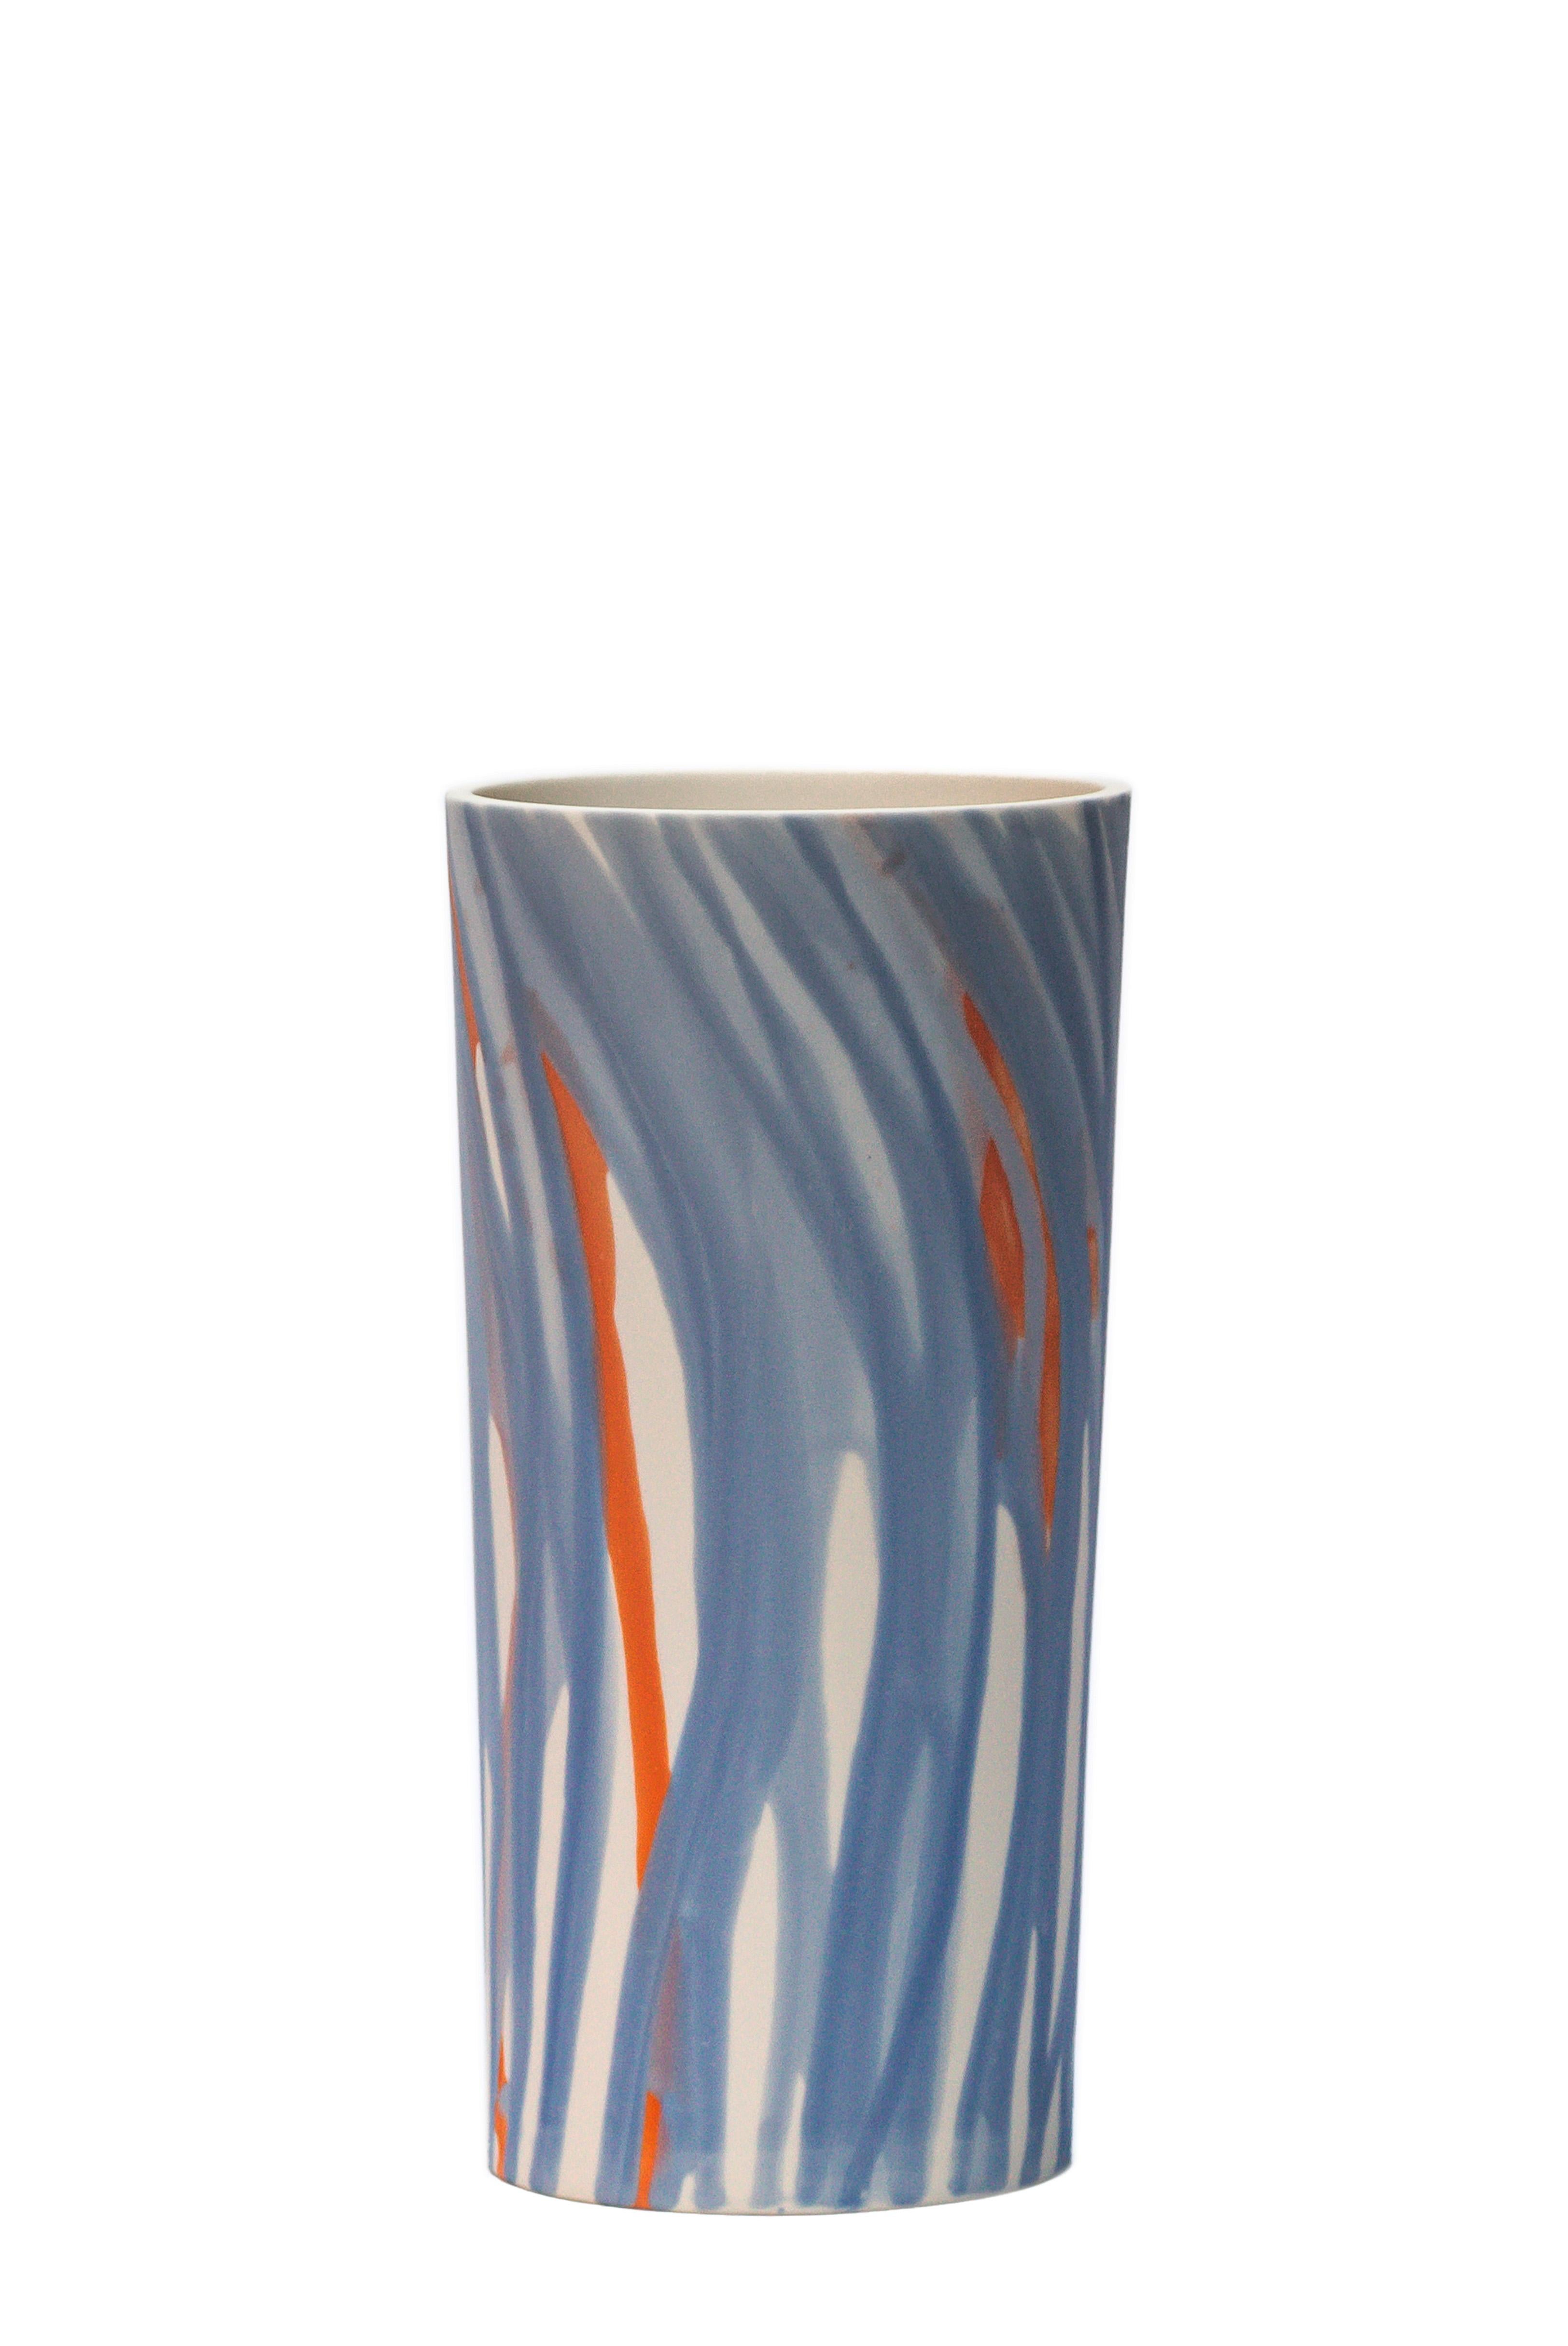 “Salmon and Sky”, 2021 Porcelain vase by Eugenio Michelini - Parianware, dripping stained slips, satin with diamond pads. Size = 10 x 20 cm h
Unique piece handmade - 2 firings

The focus of Eugenio Michelini (Italy, 1970) interest lies in the